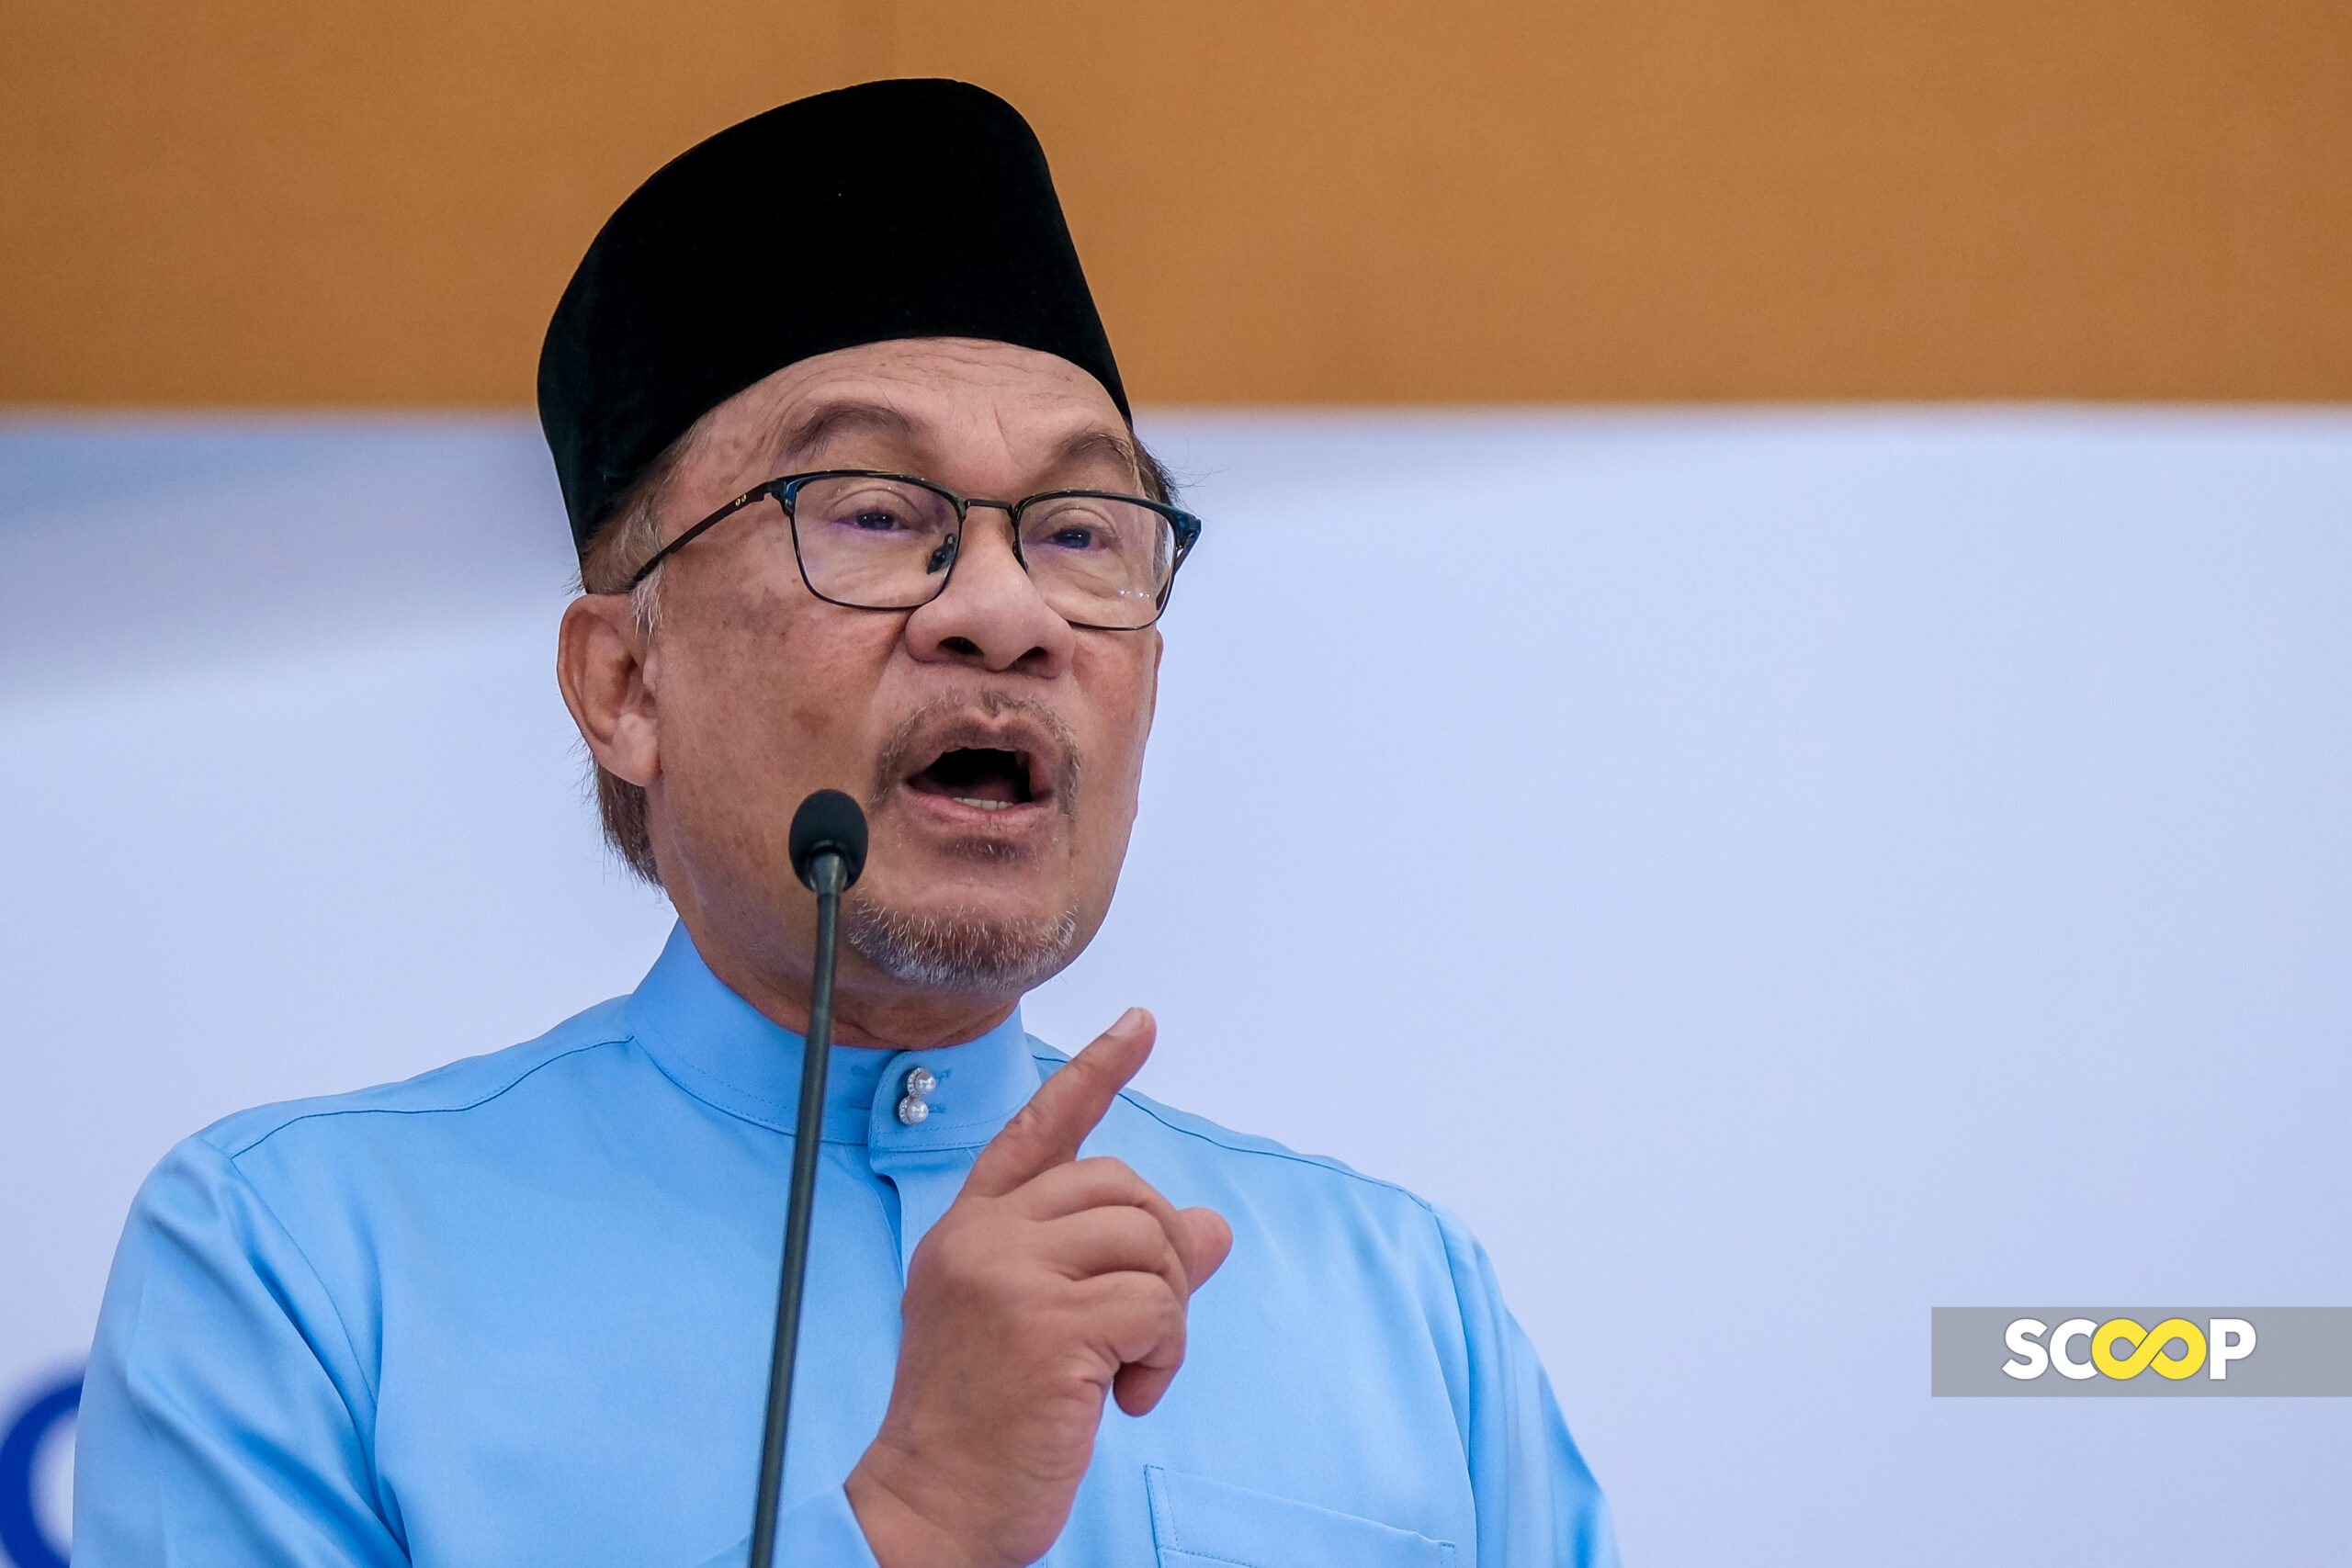 Special committee on shariah laws open to discussions with all parties, says Anwar